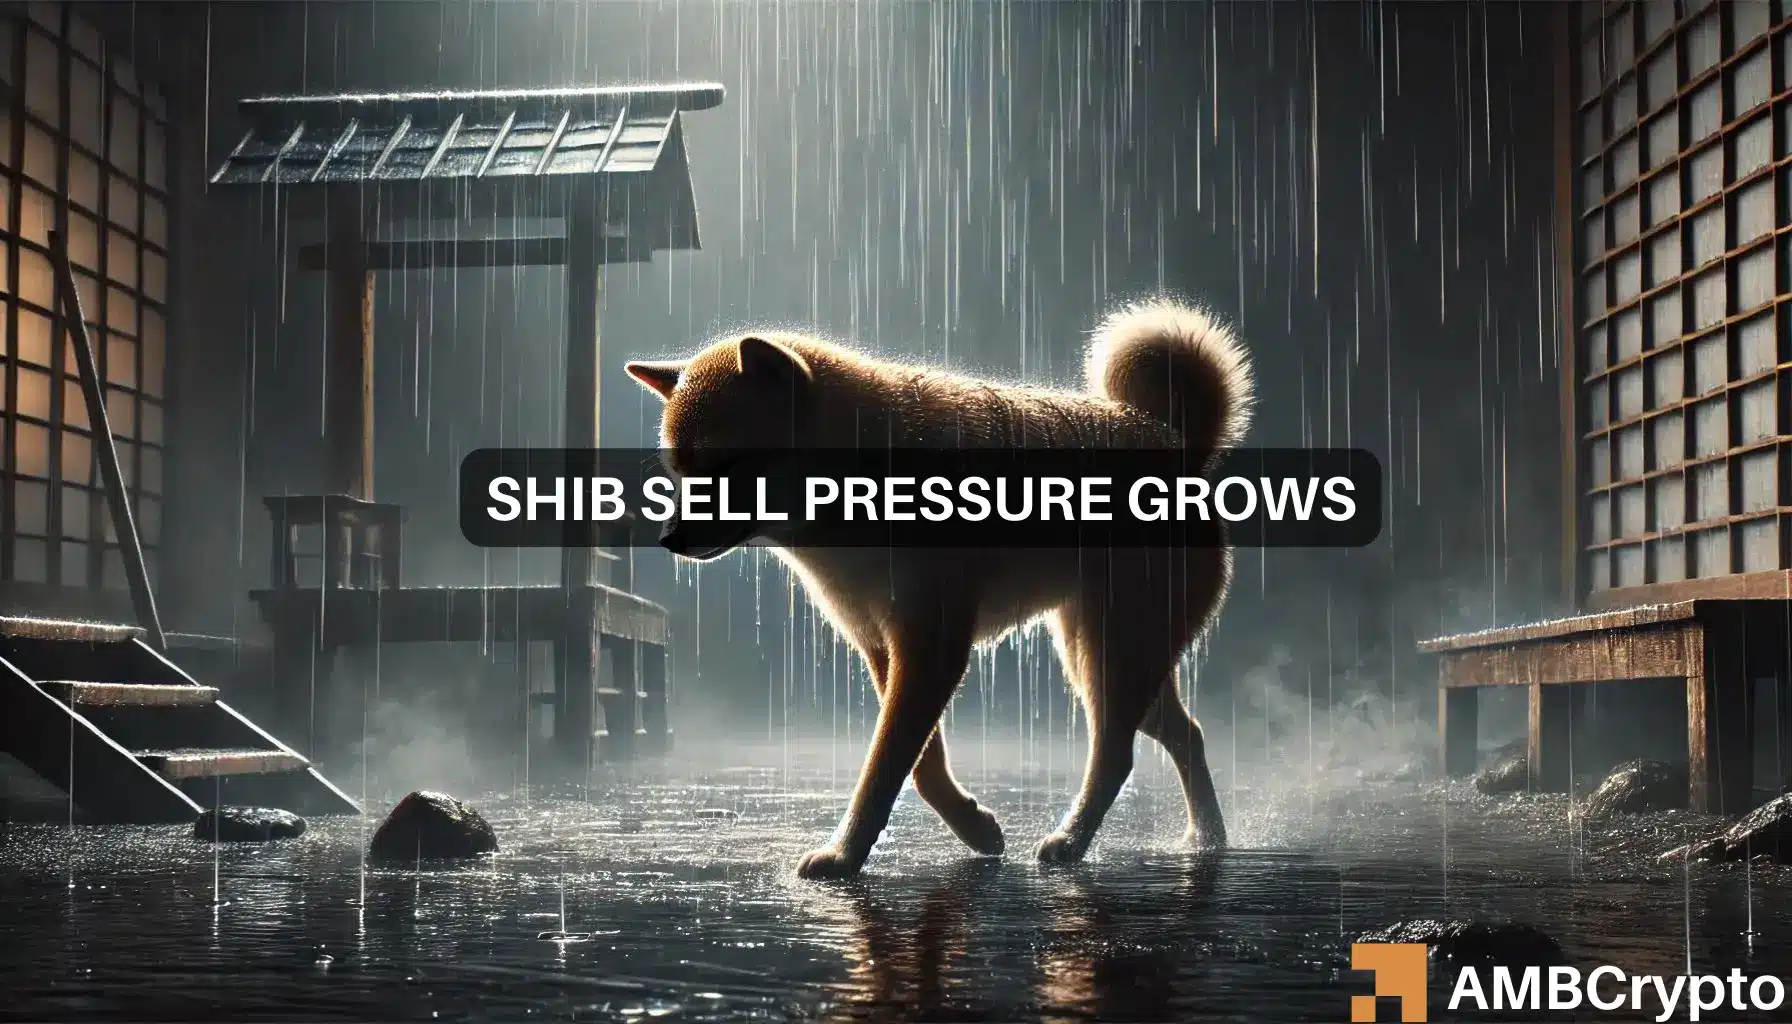 Shiba Inu price prediction: Price action shows bullishness, but buy pressure is low